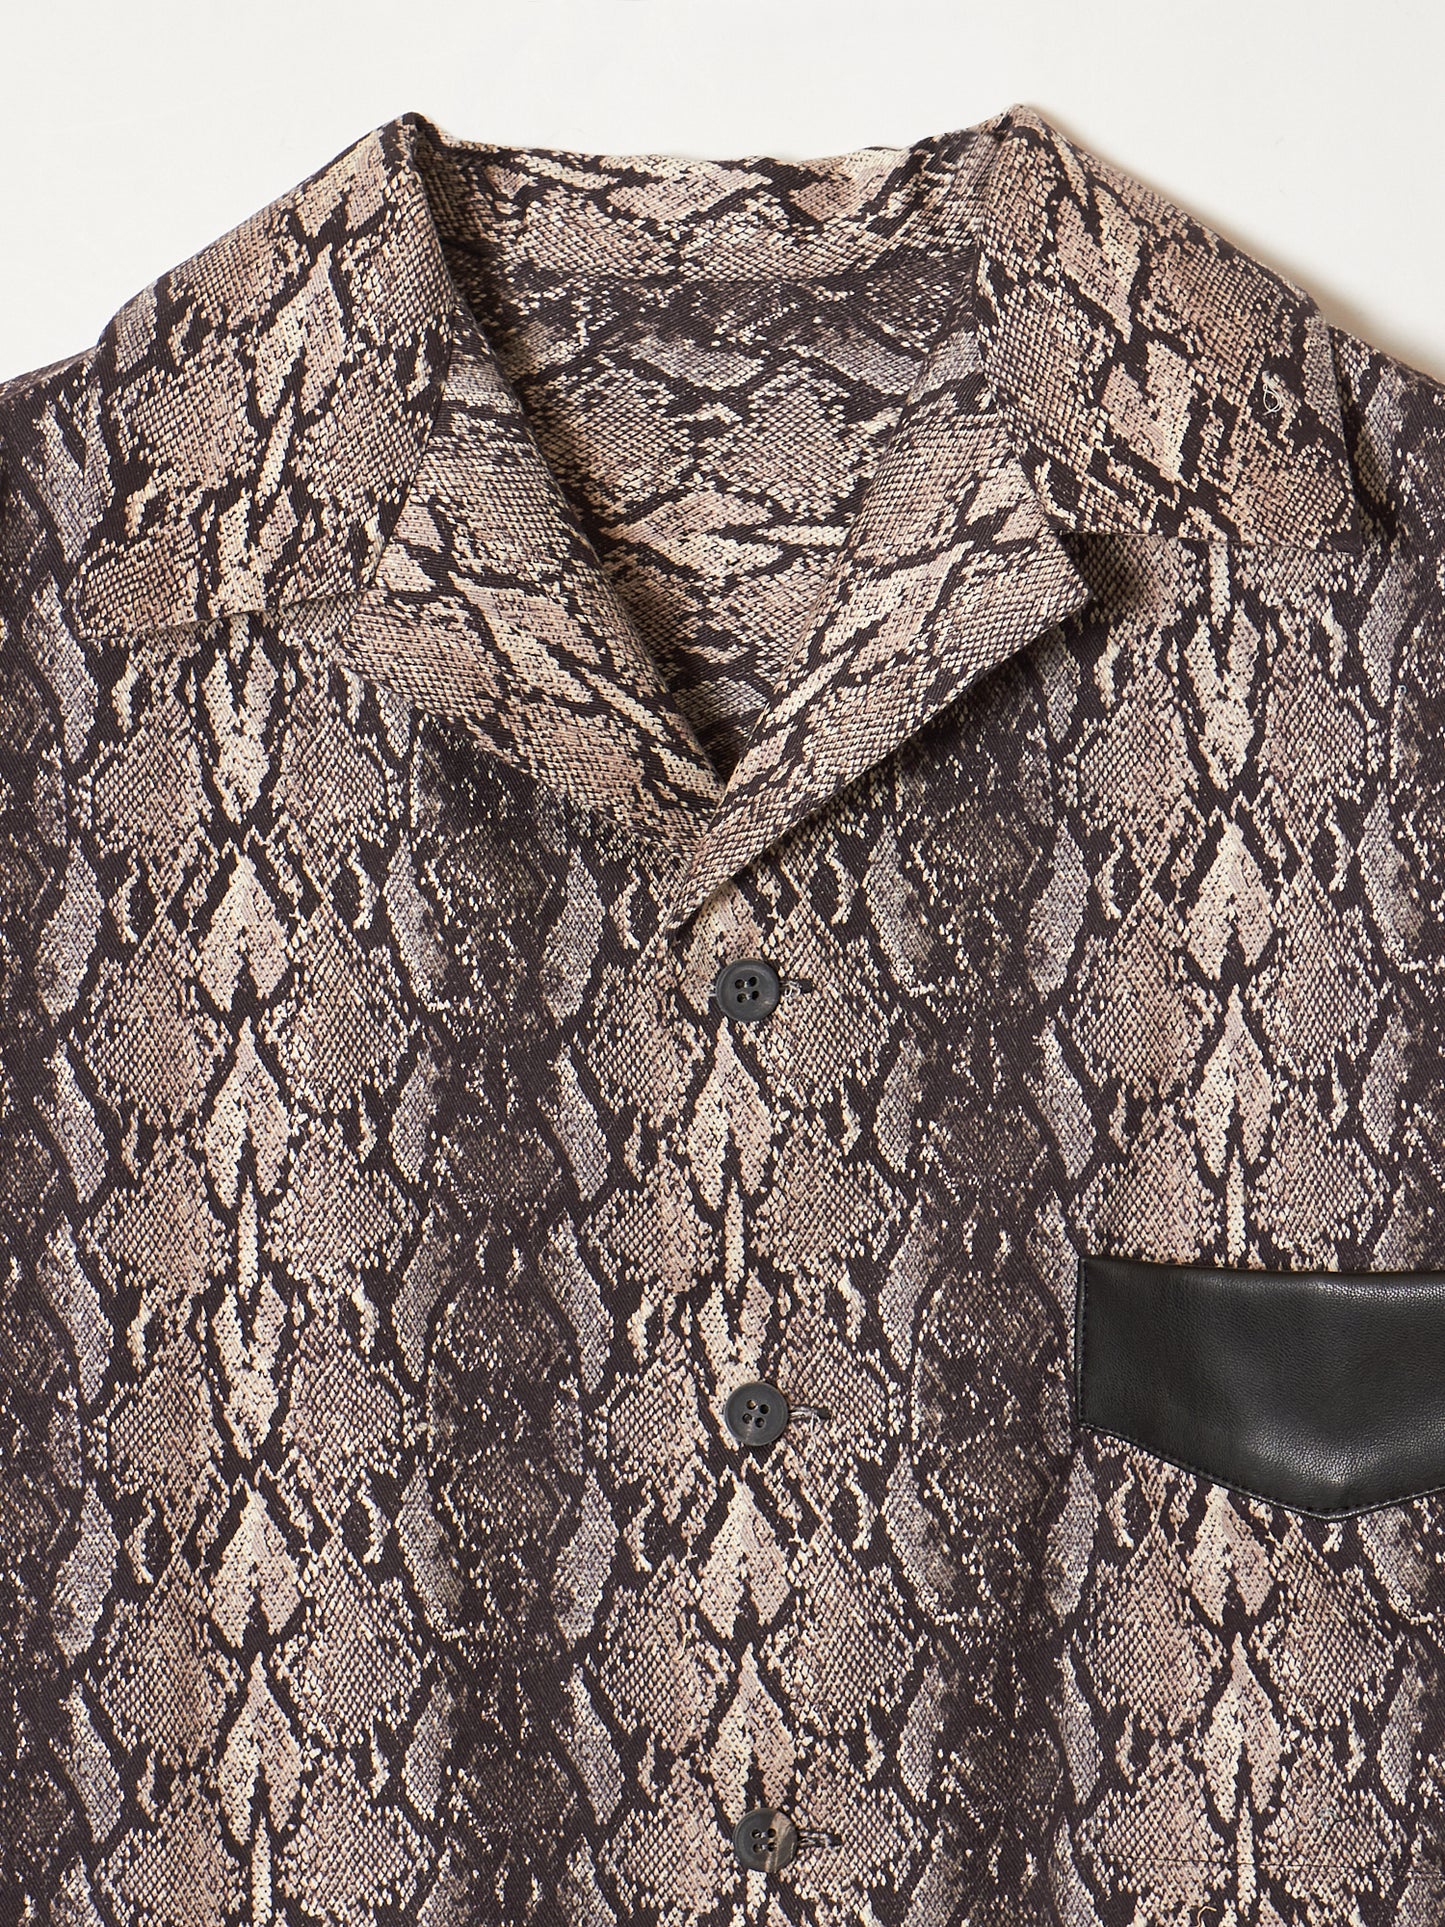 three headed snake shirt【Delivery in January 2023】